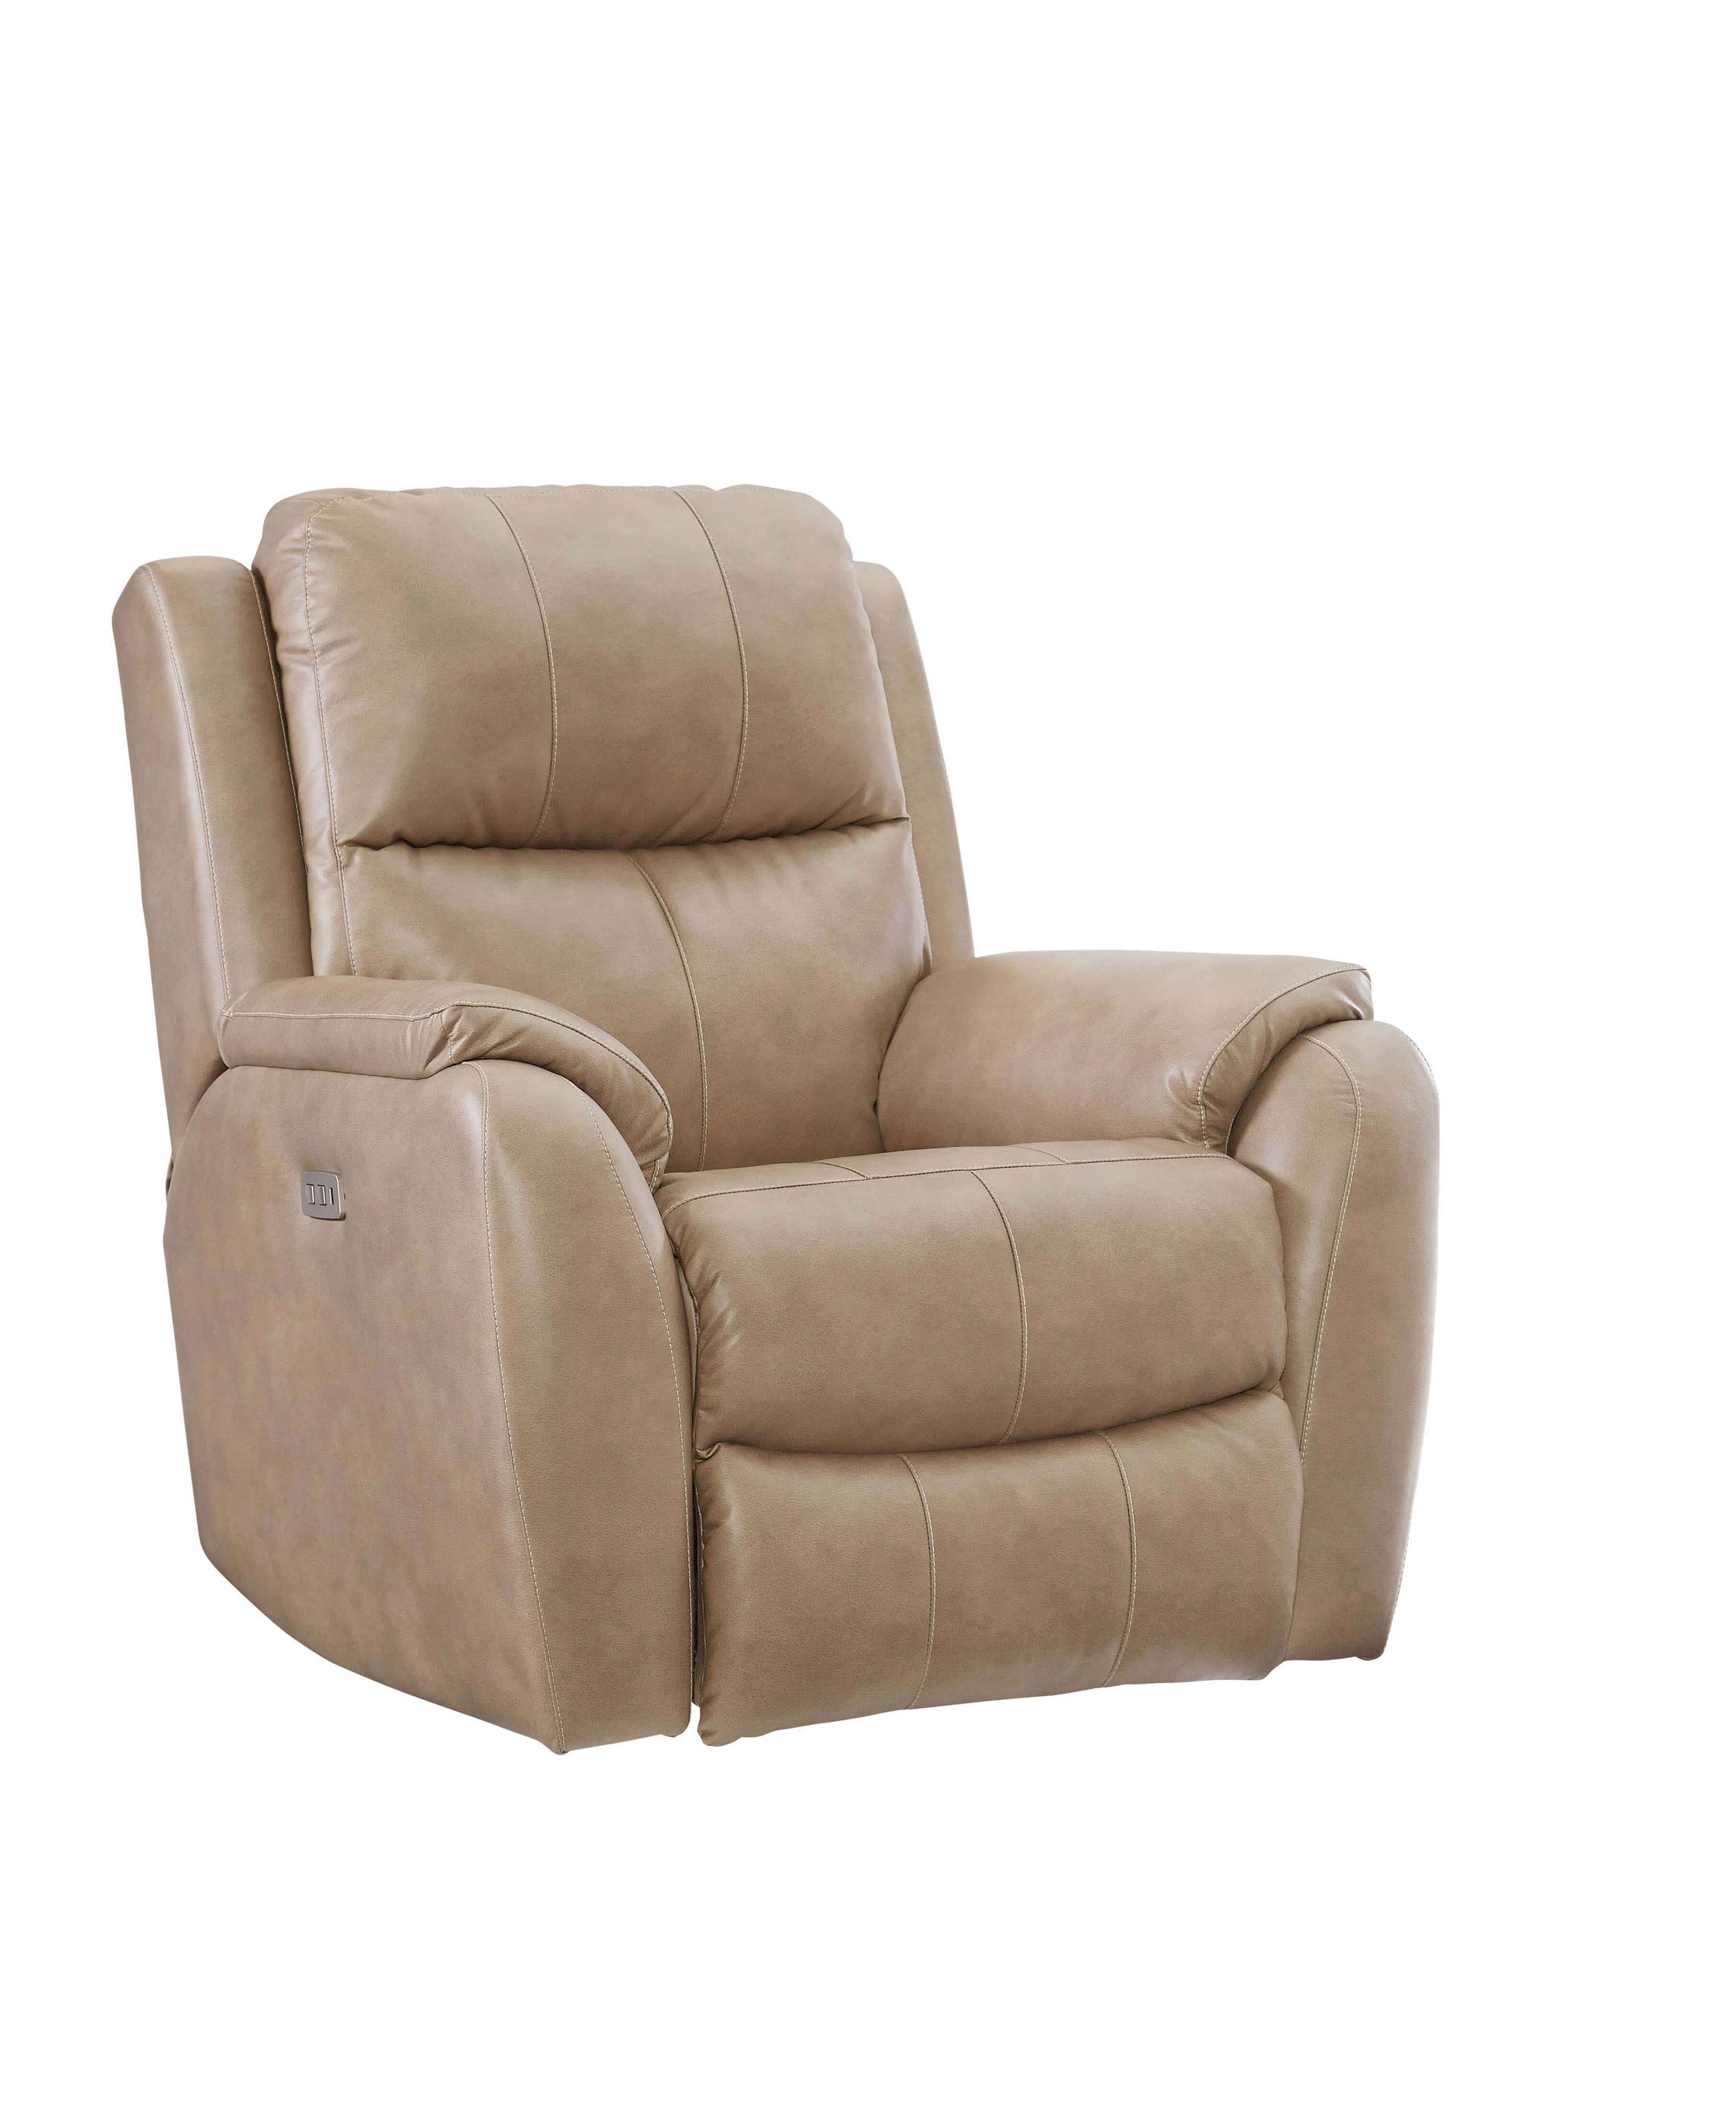 1332 Marquis Recliner Southern Motion, Simmons Leather Rocker Recliner